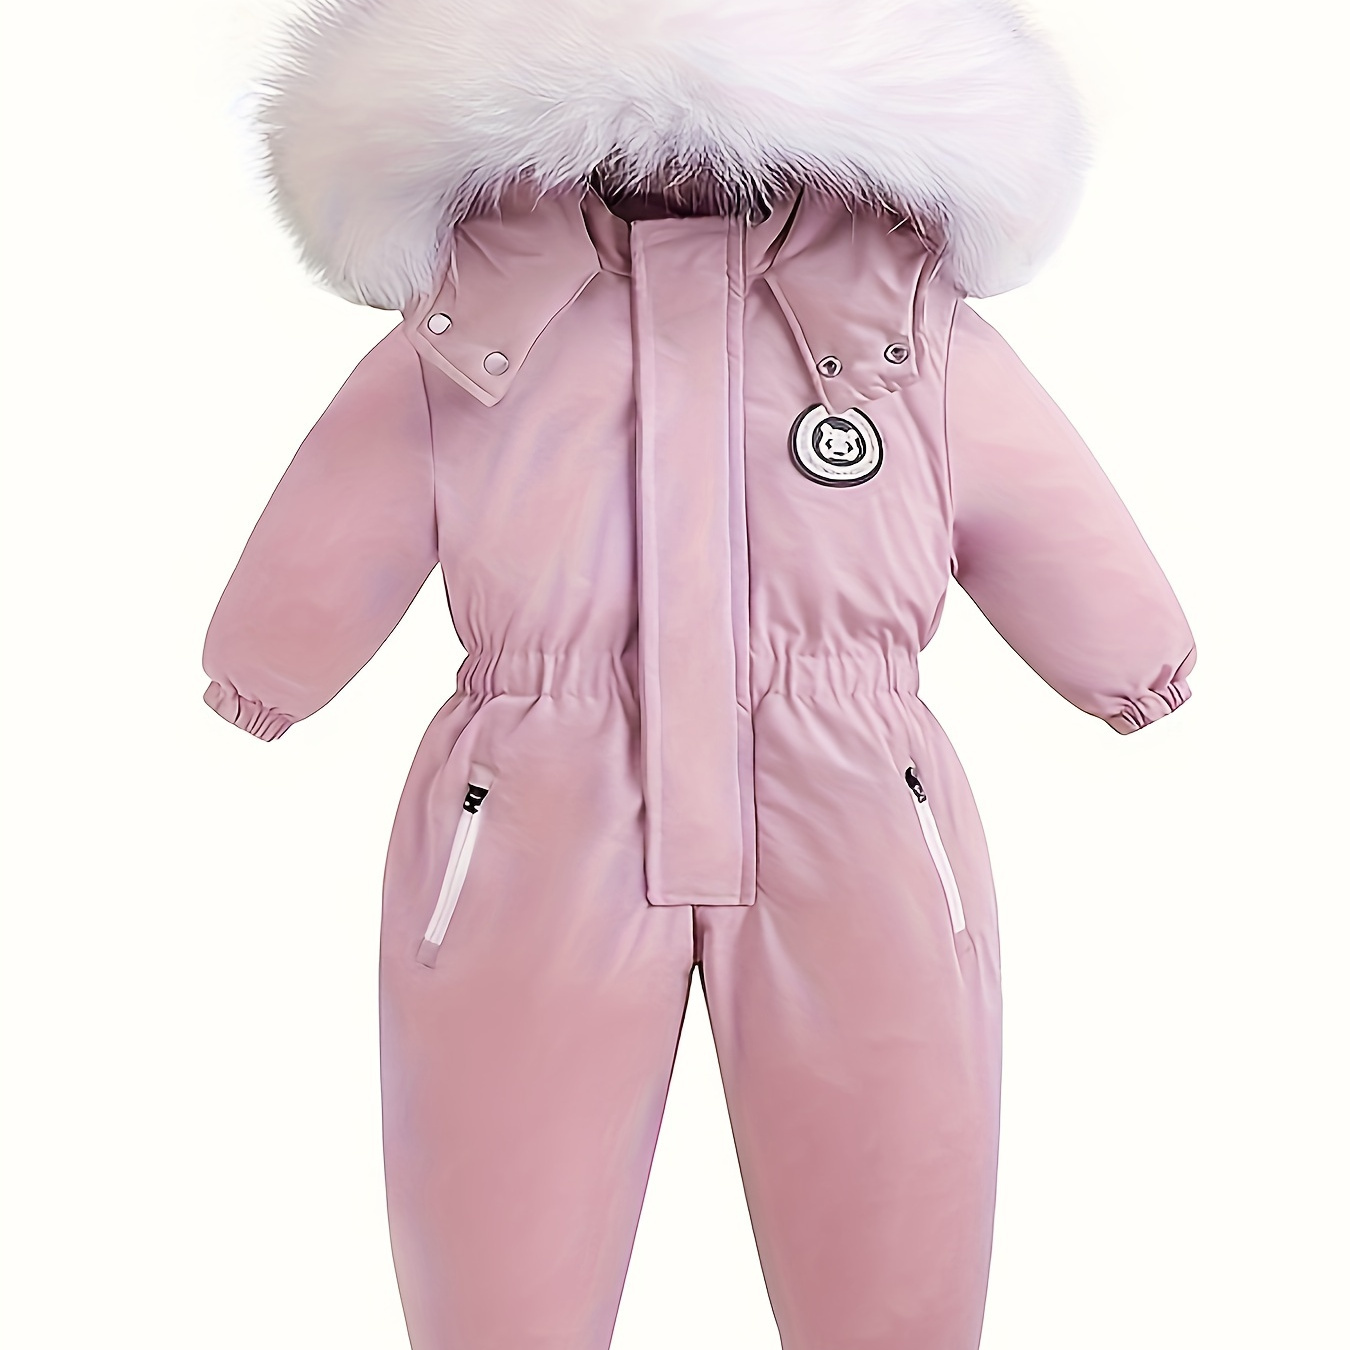 

Girls/boys Outdoor Ski Suits Winter Warm Hooded Jumpsuit With Zipper Pockets